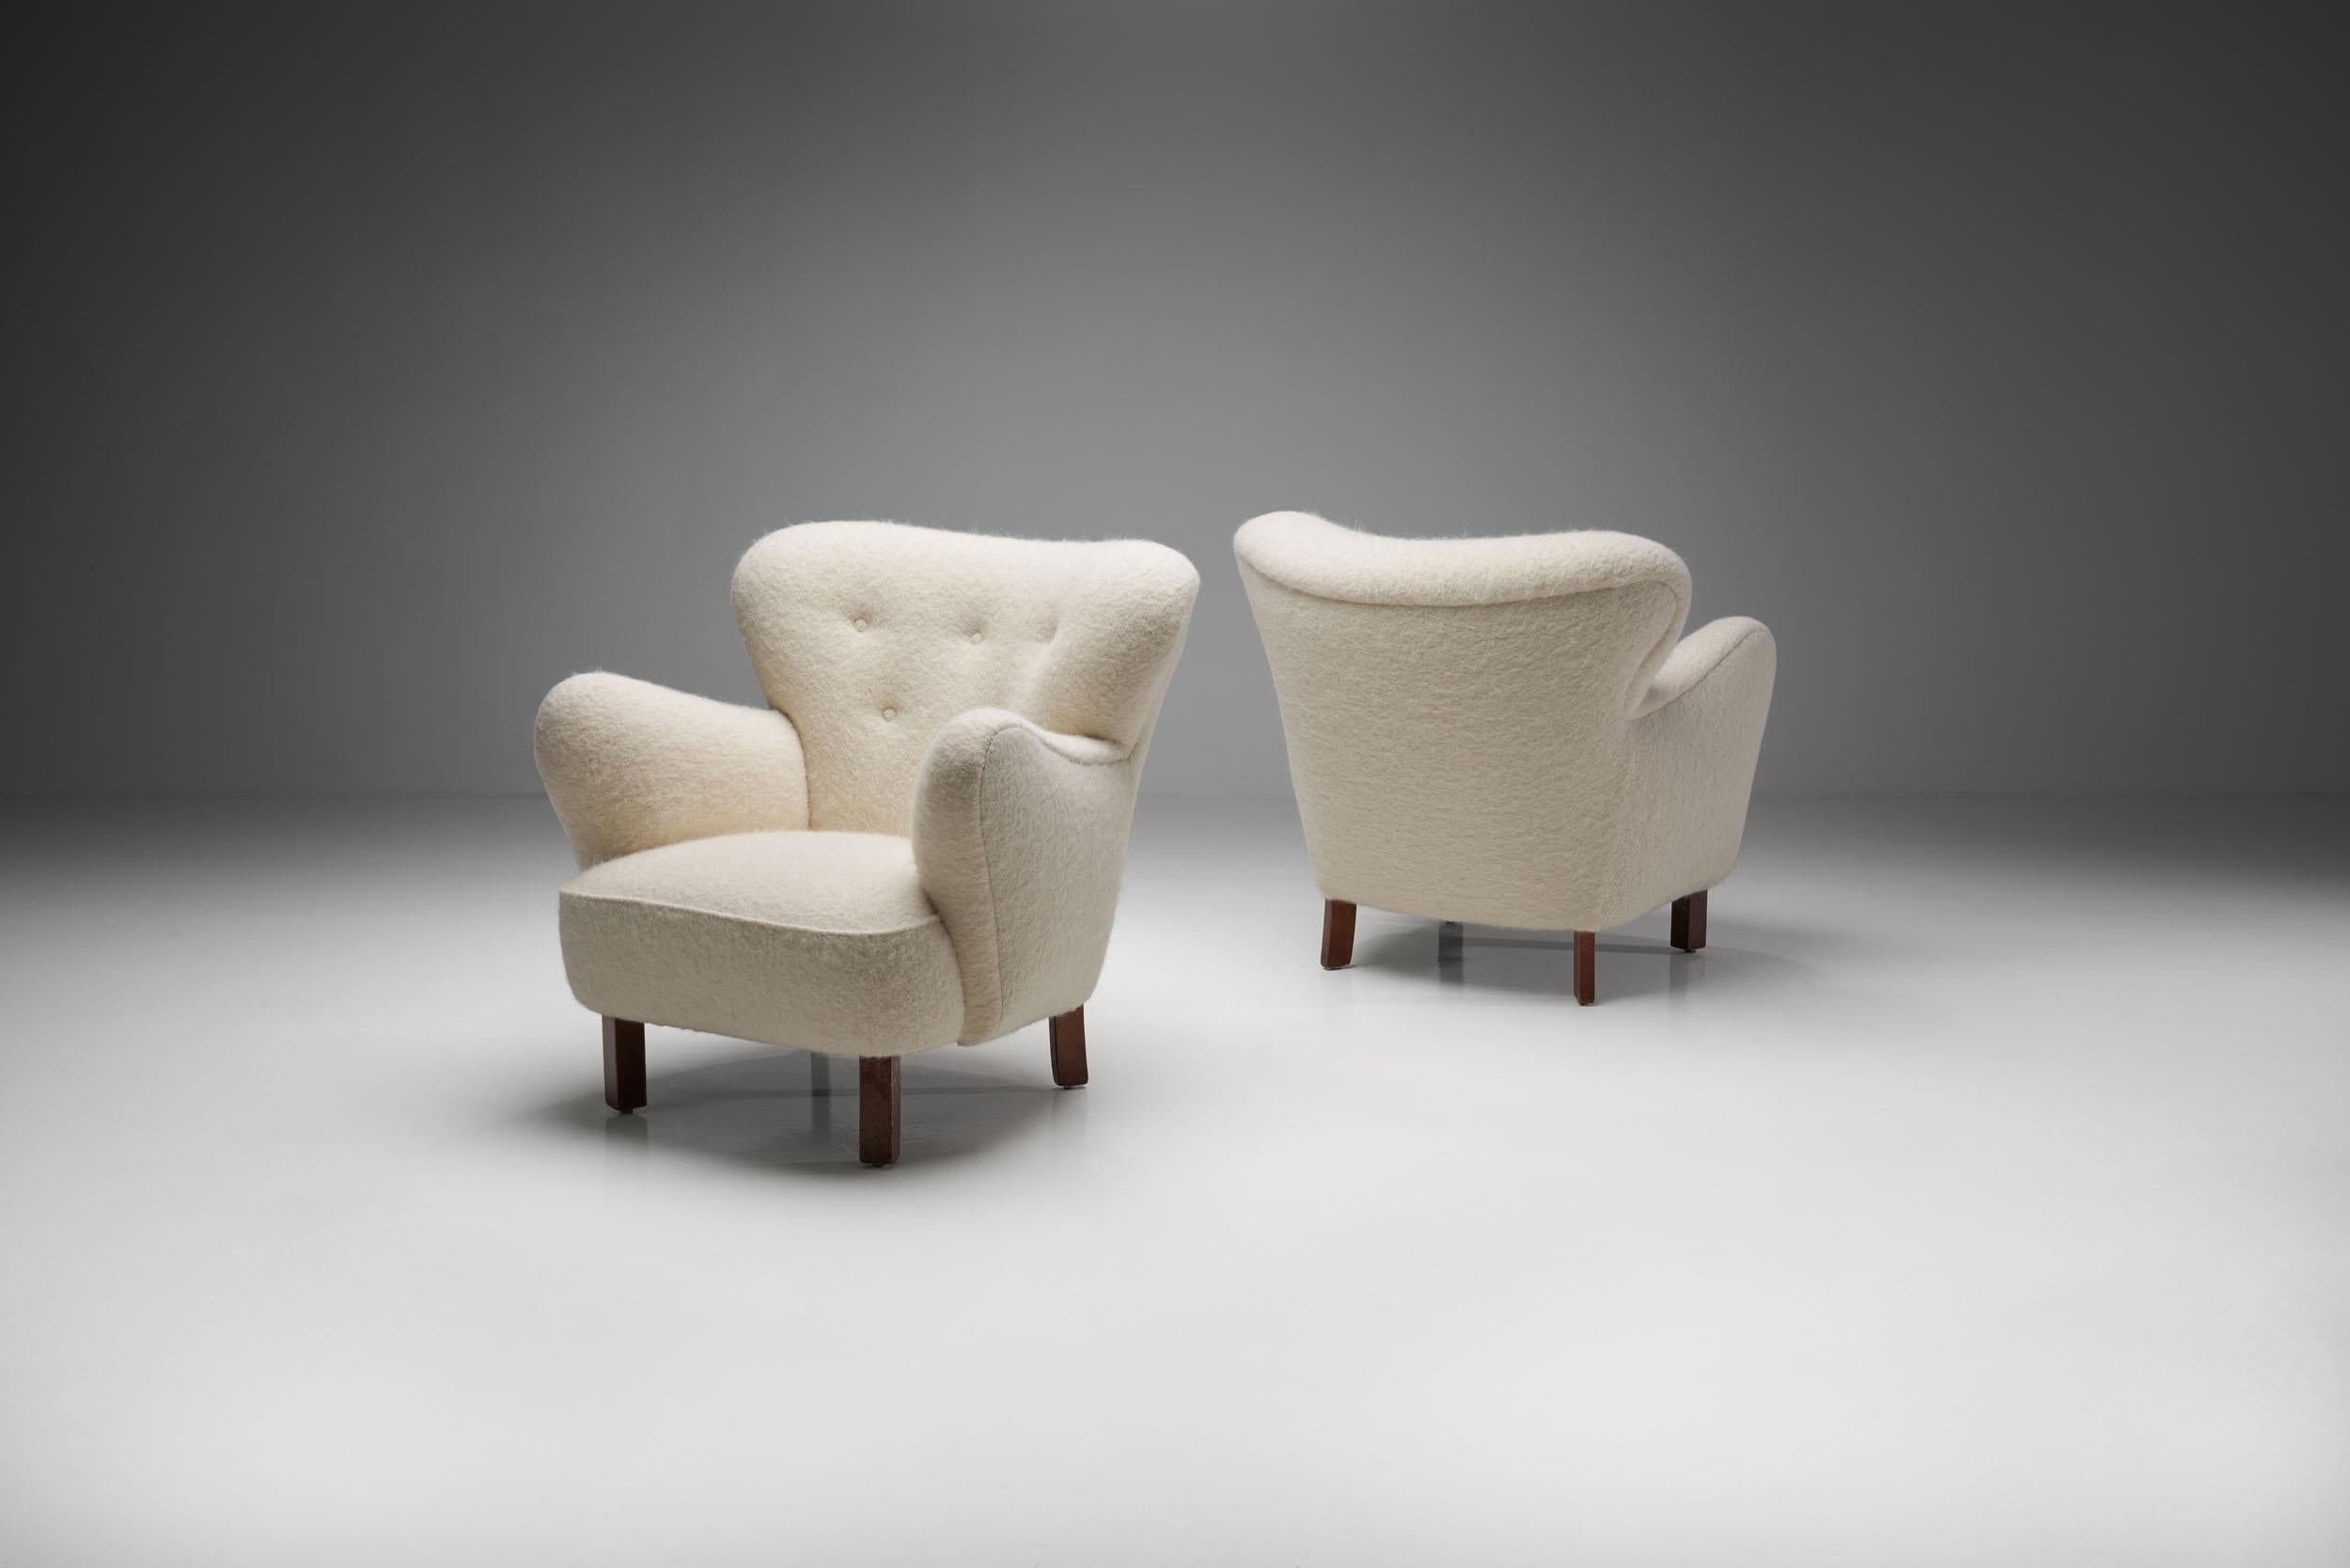 This unique 1940s pair of “Polar” chairs are a great representation of the quality and craftsmanship of Danish master cabinetmakers and the immediately recognizable characteristics of Scandinavian design.

The slender wooden legs prevent the